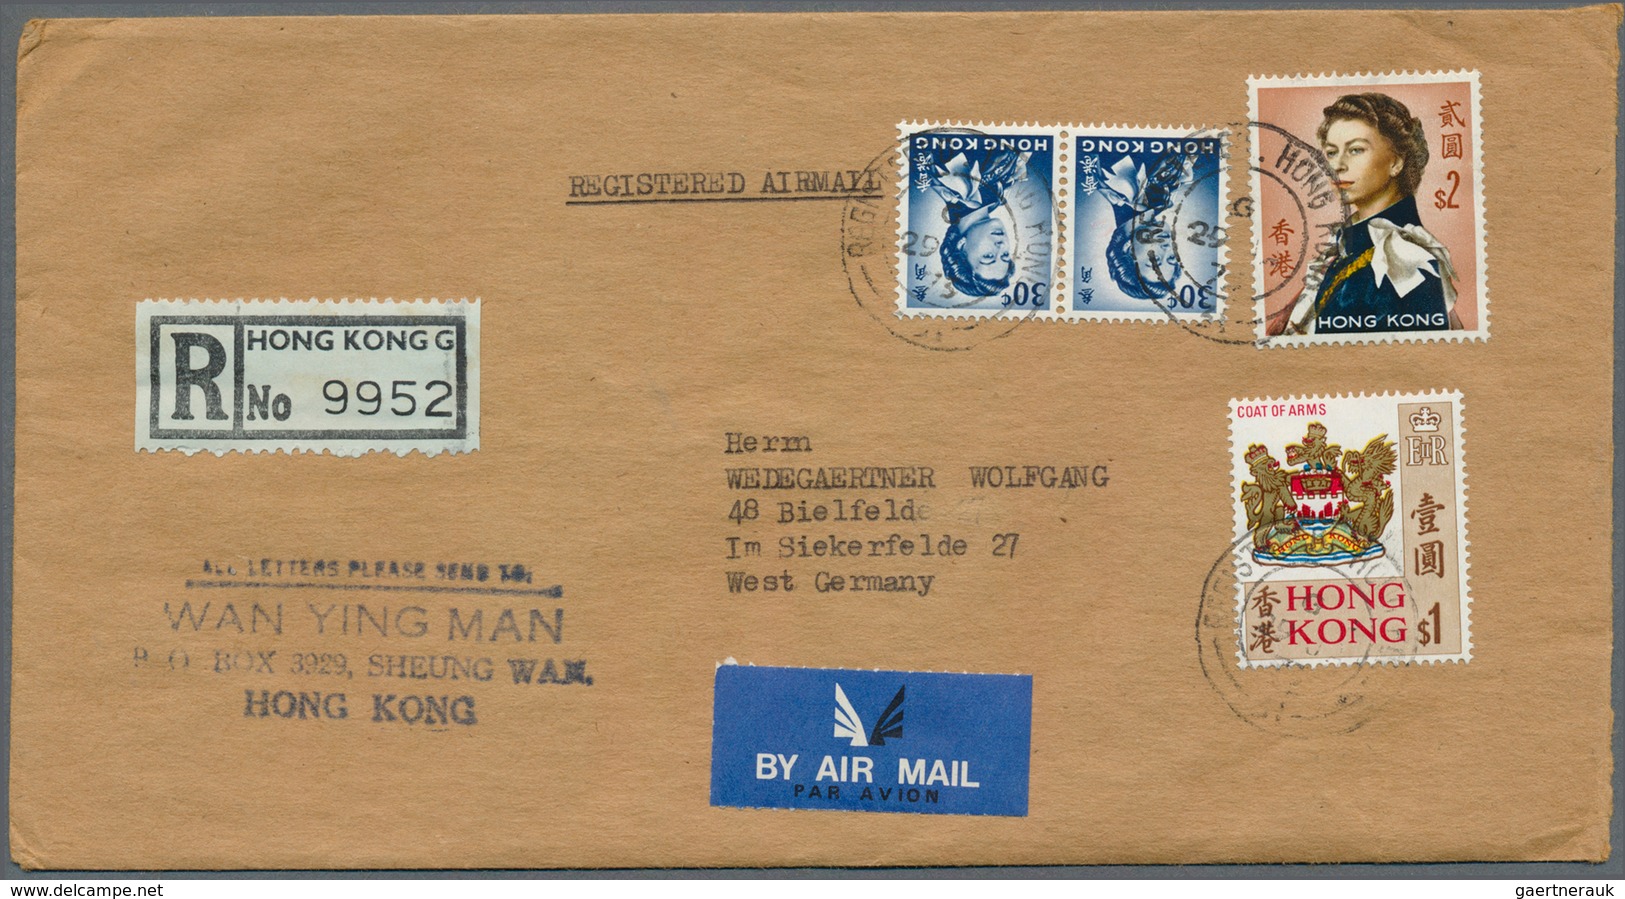 22445 China - Volksrepublik: 1955/2008 (ca.), covers/used ppc of PR China (52), also Taiwan (56) and Hong